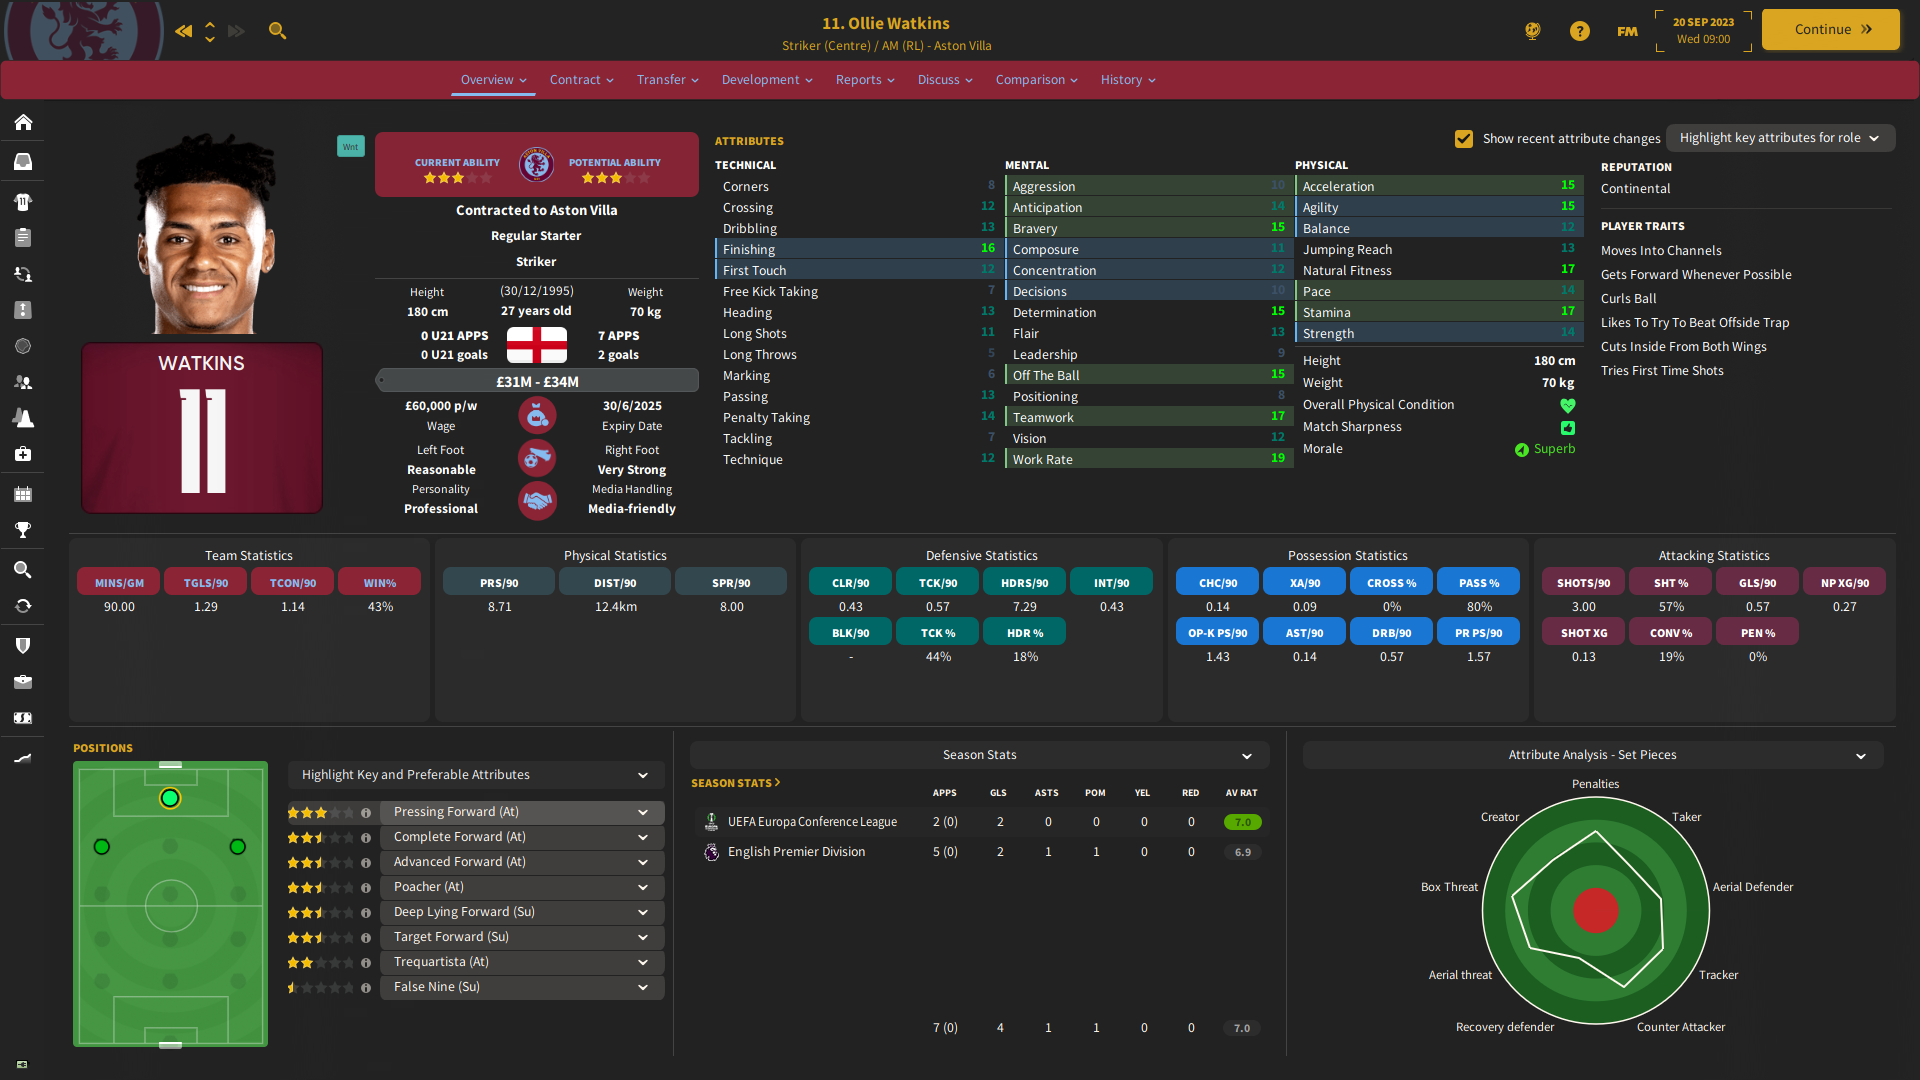 How to Insert Skins in Football Manager 2024, FM Blog